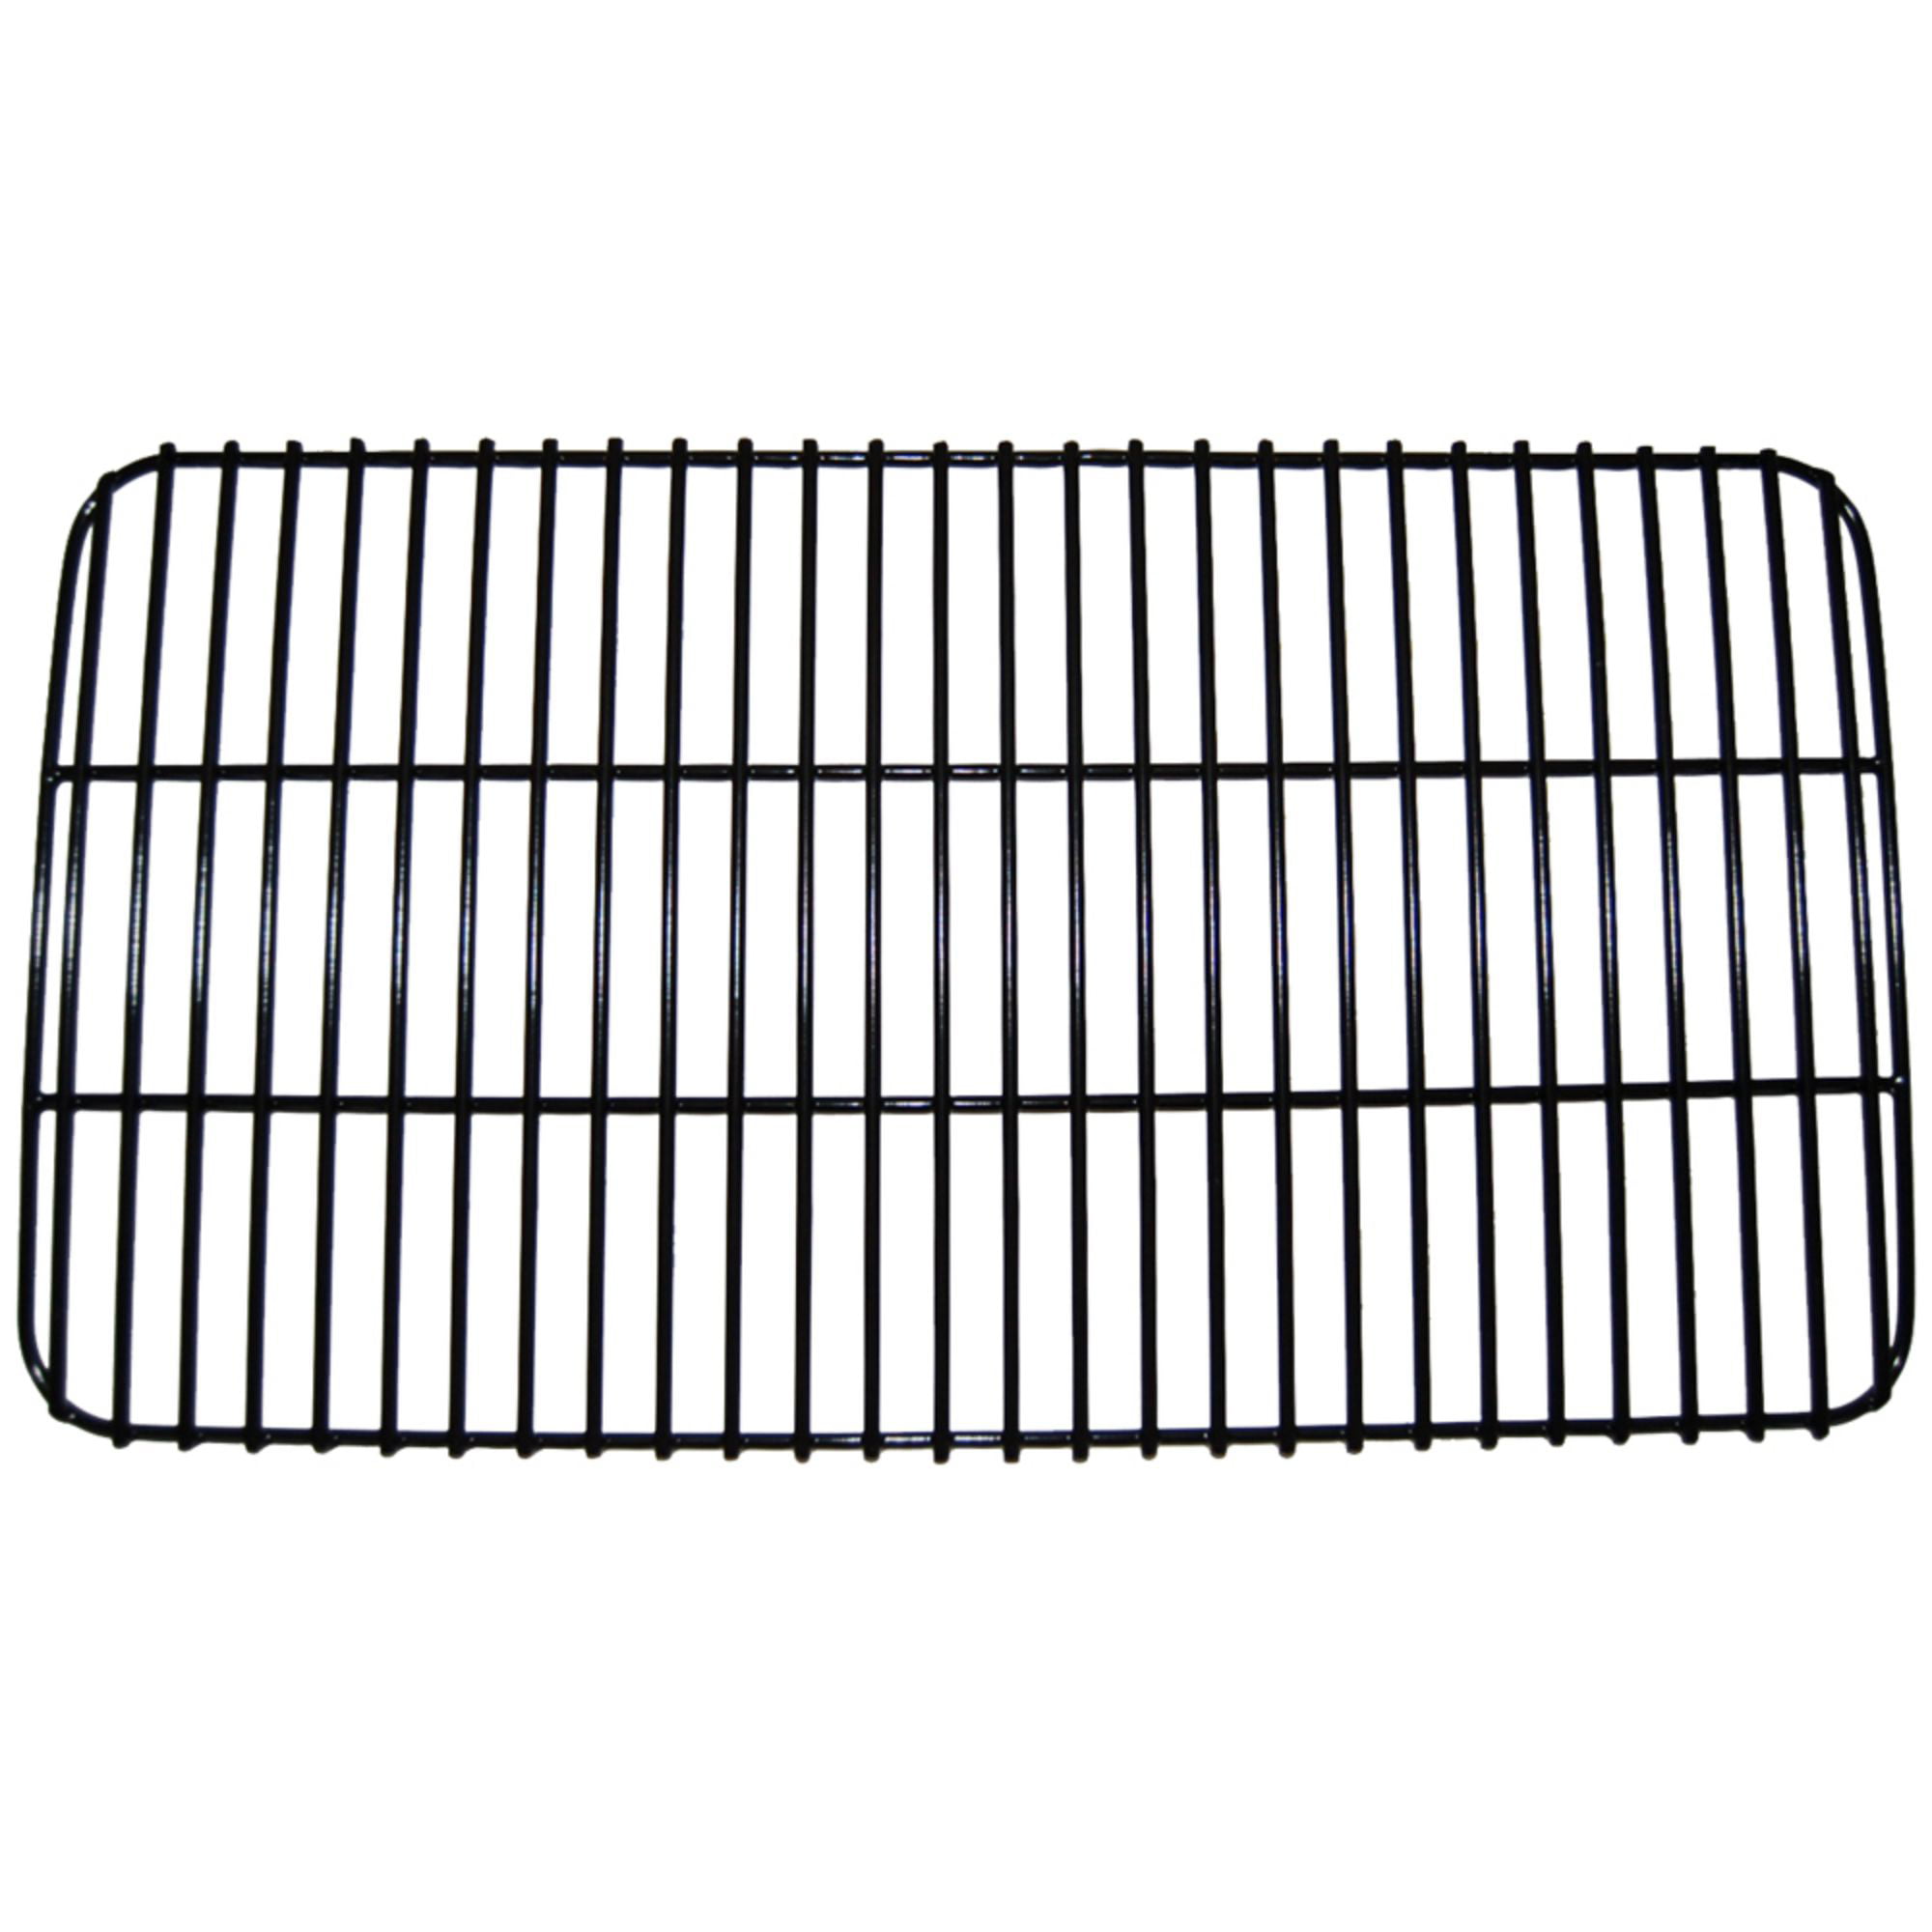 Aussie Gas Grill  Chrome Plated Cooking Grid  19" x 18.5"  44281 